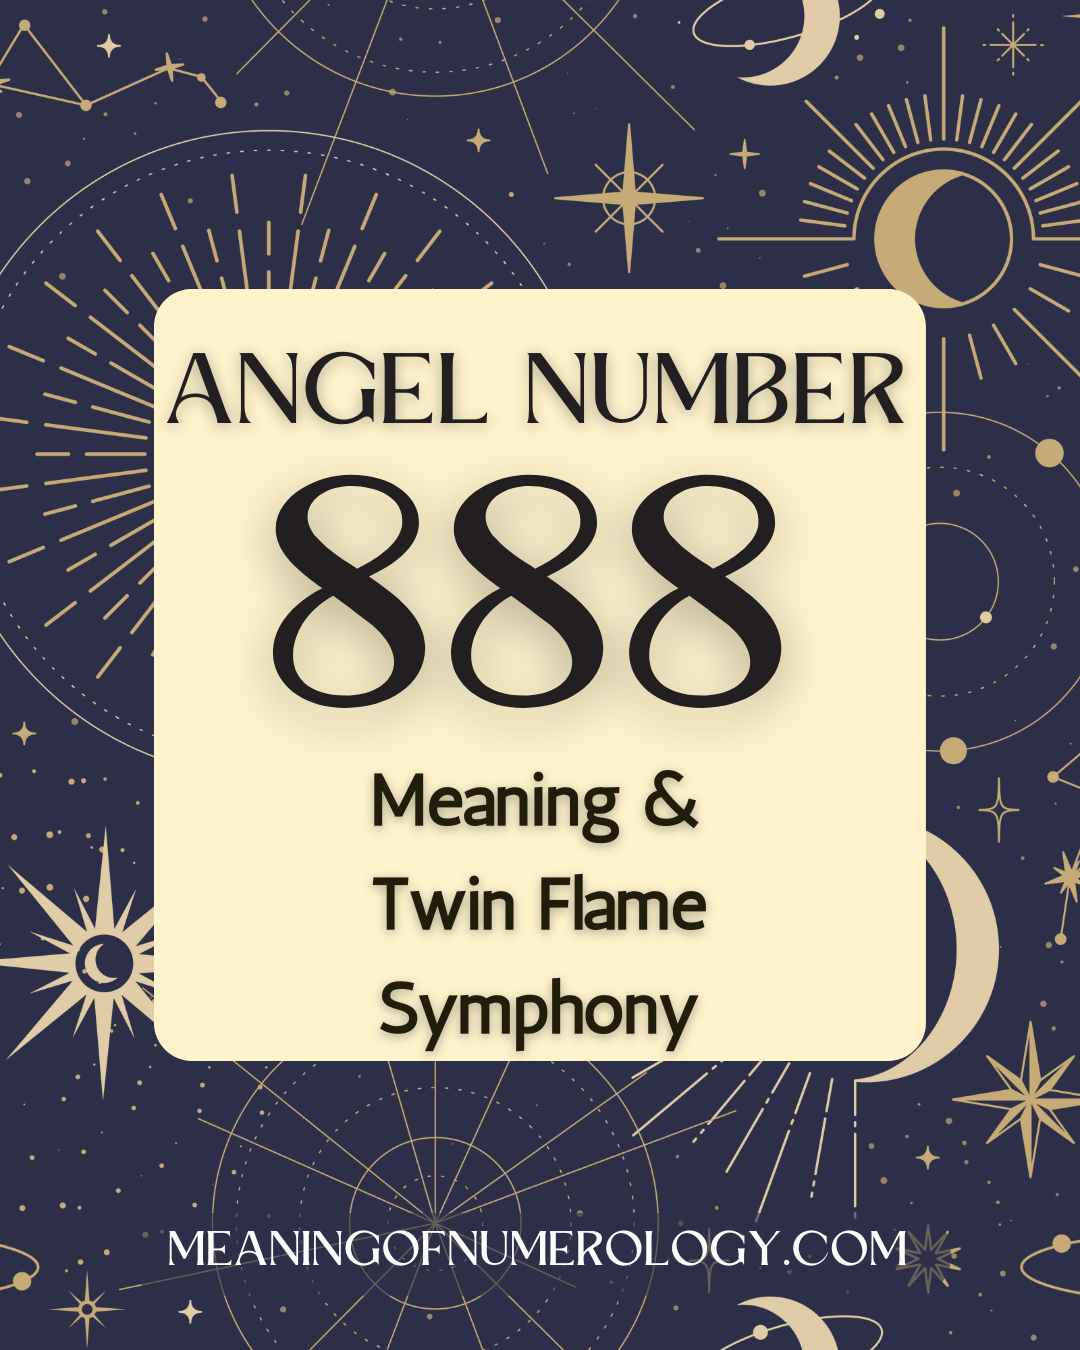 Purple Mystic Astrology Moon Angel Number 888 Meaning & Twin Flame Symphony